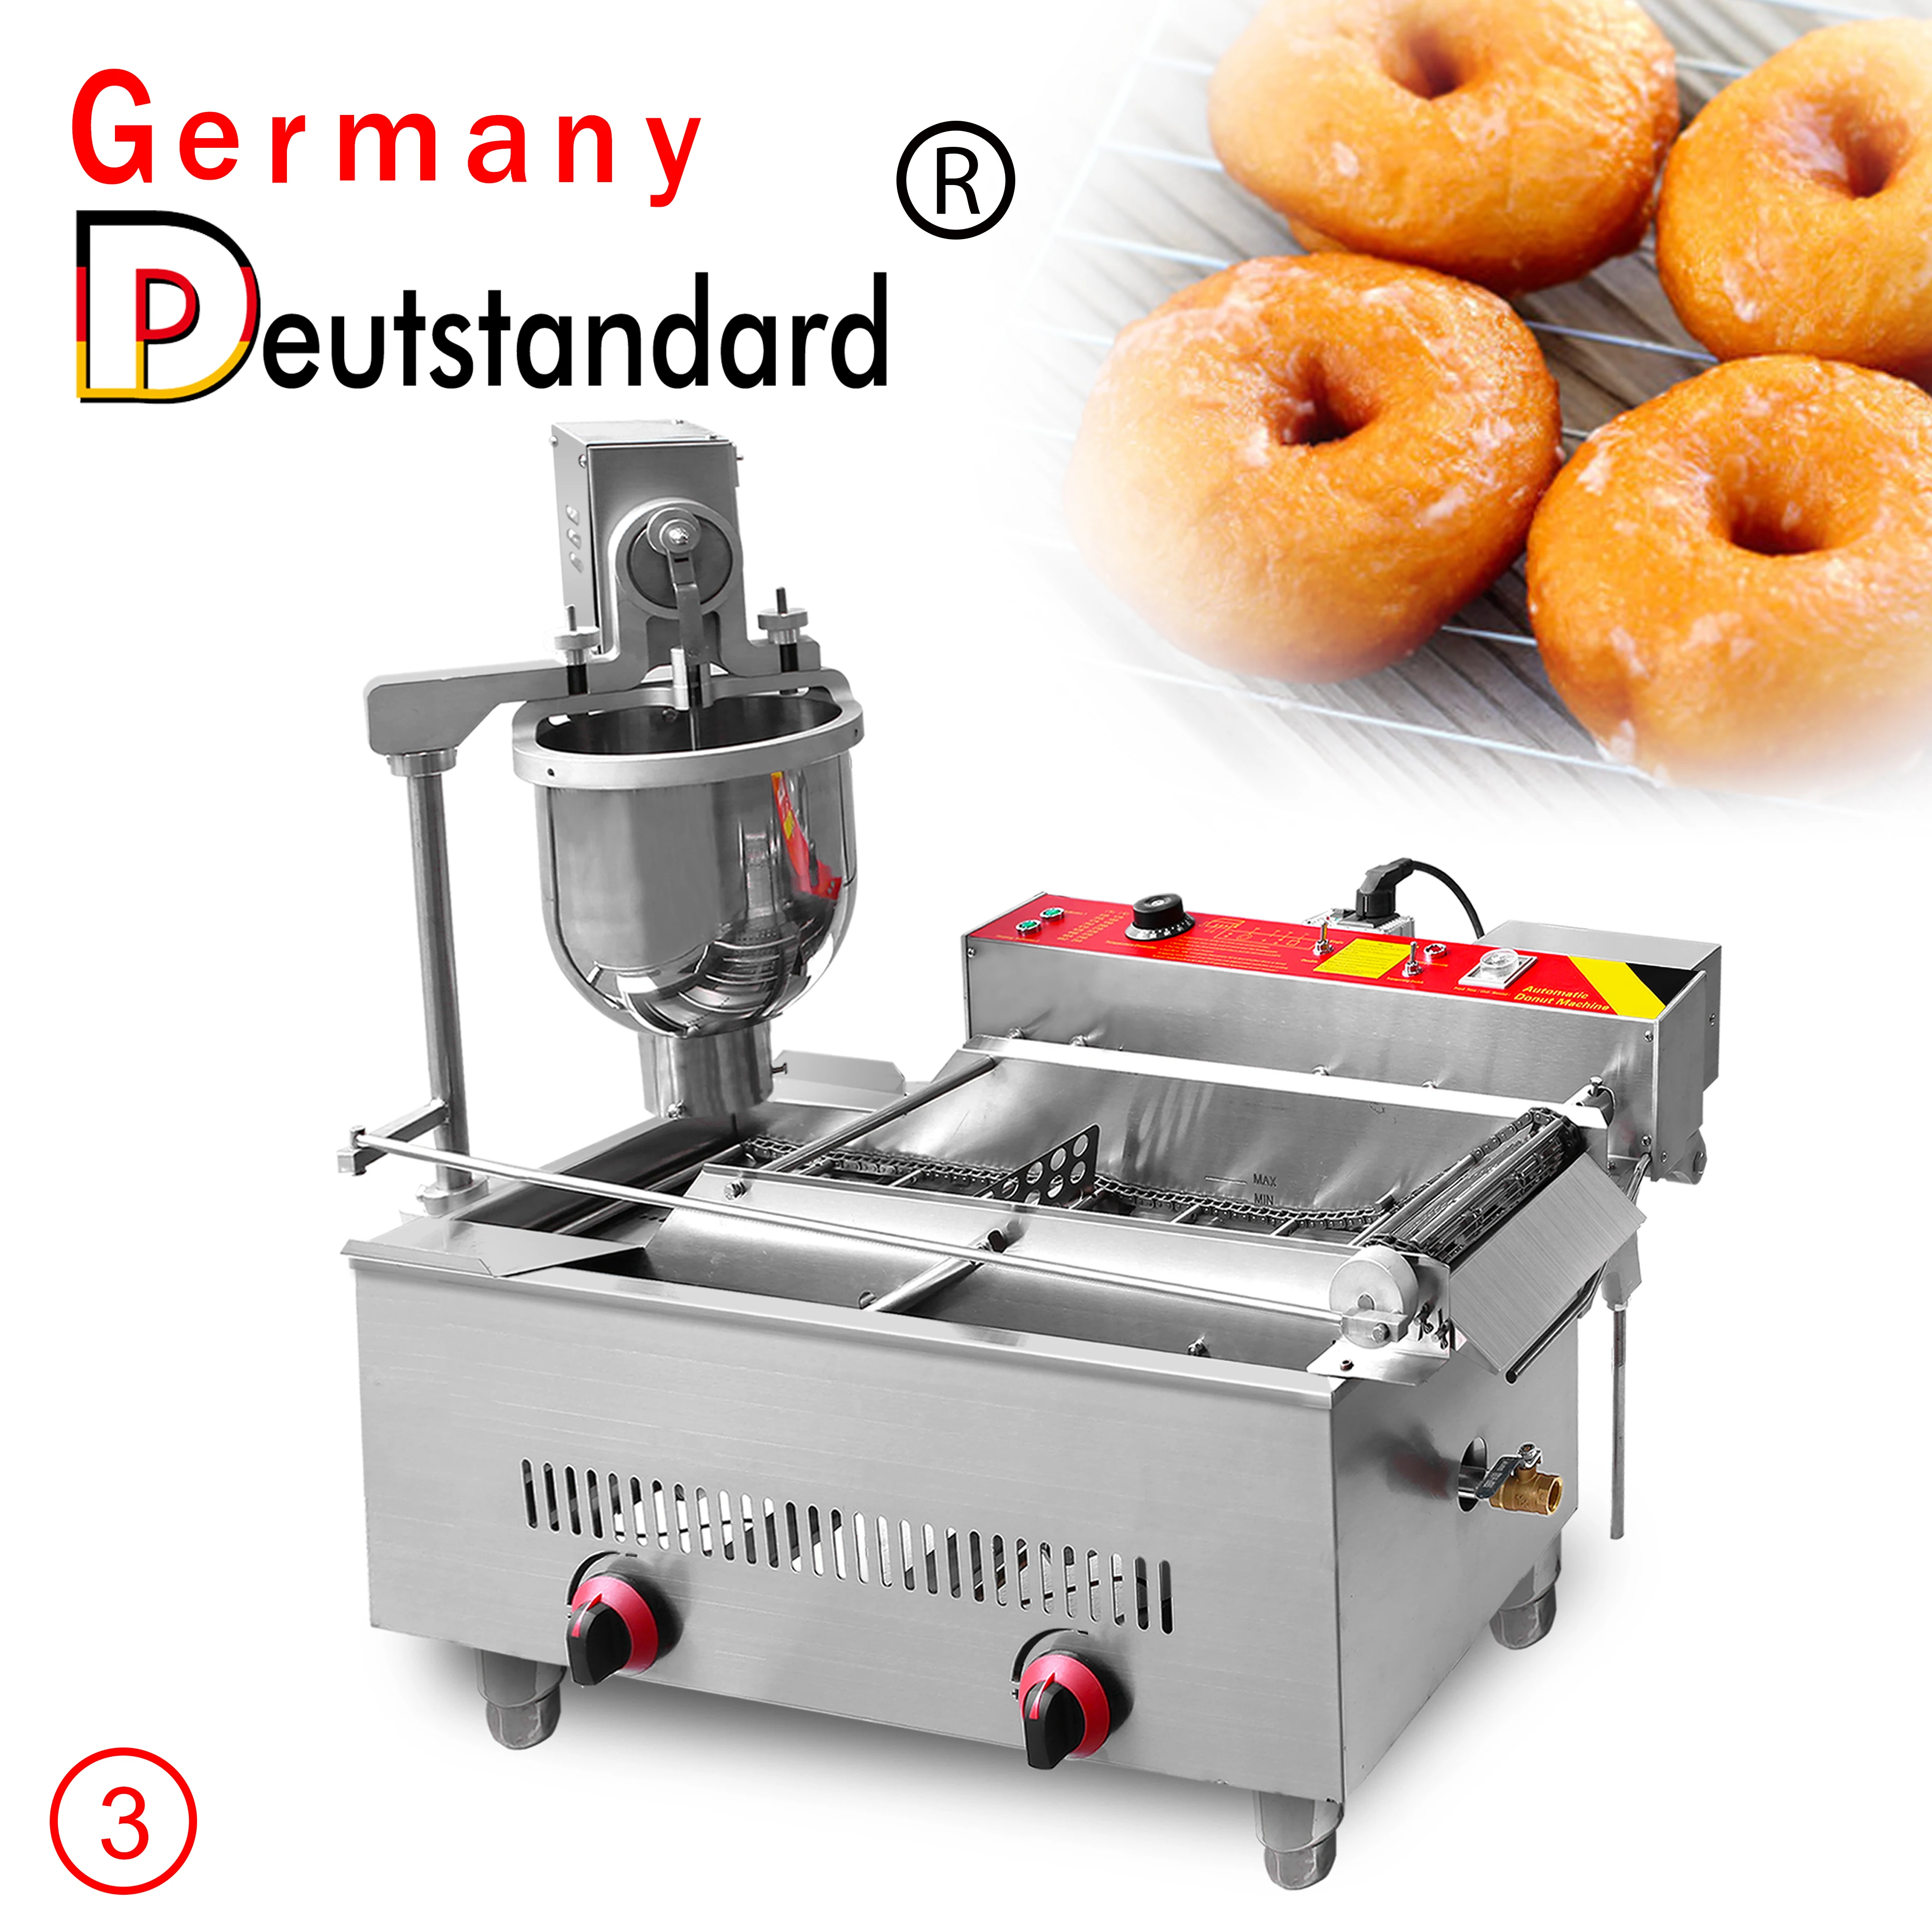 2021 Gas and Electric Automatic Commercial Donut Machine Stainless Steel Mini Fryer Circle Doughnut Maker Industrial With CE 2021 amazon air fryer oven 10 in 1 toaster with rotisserie